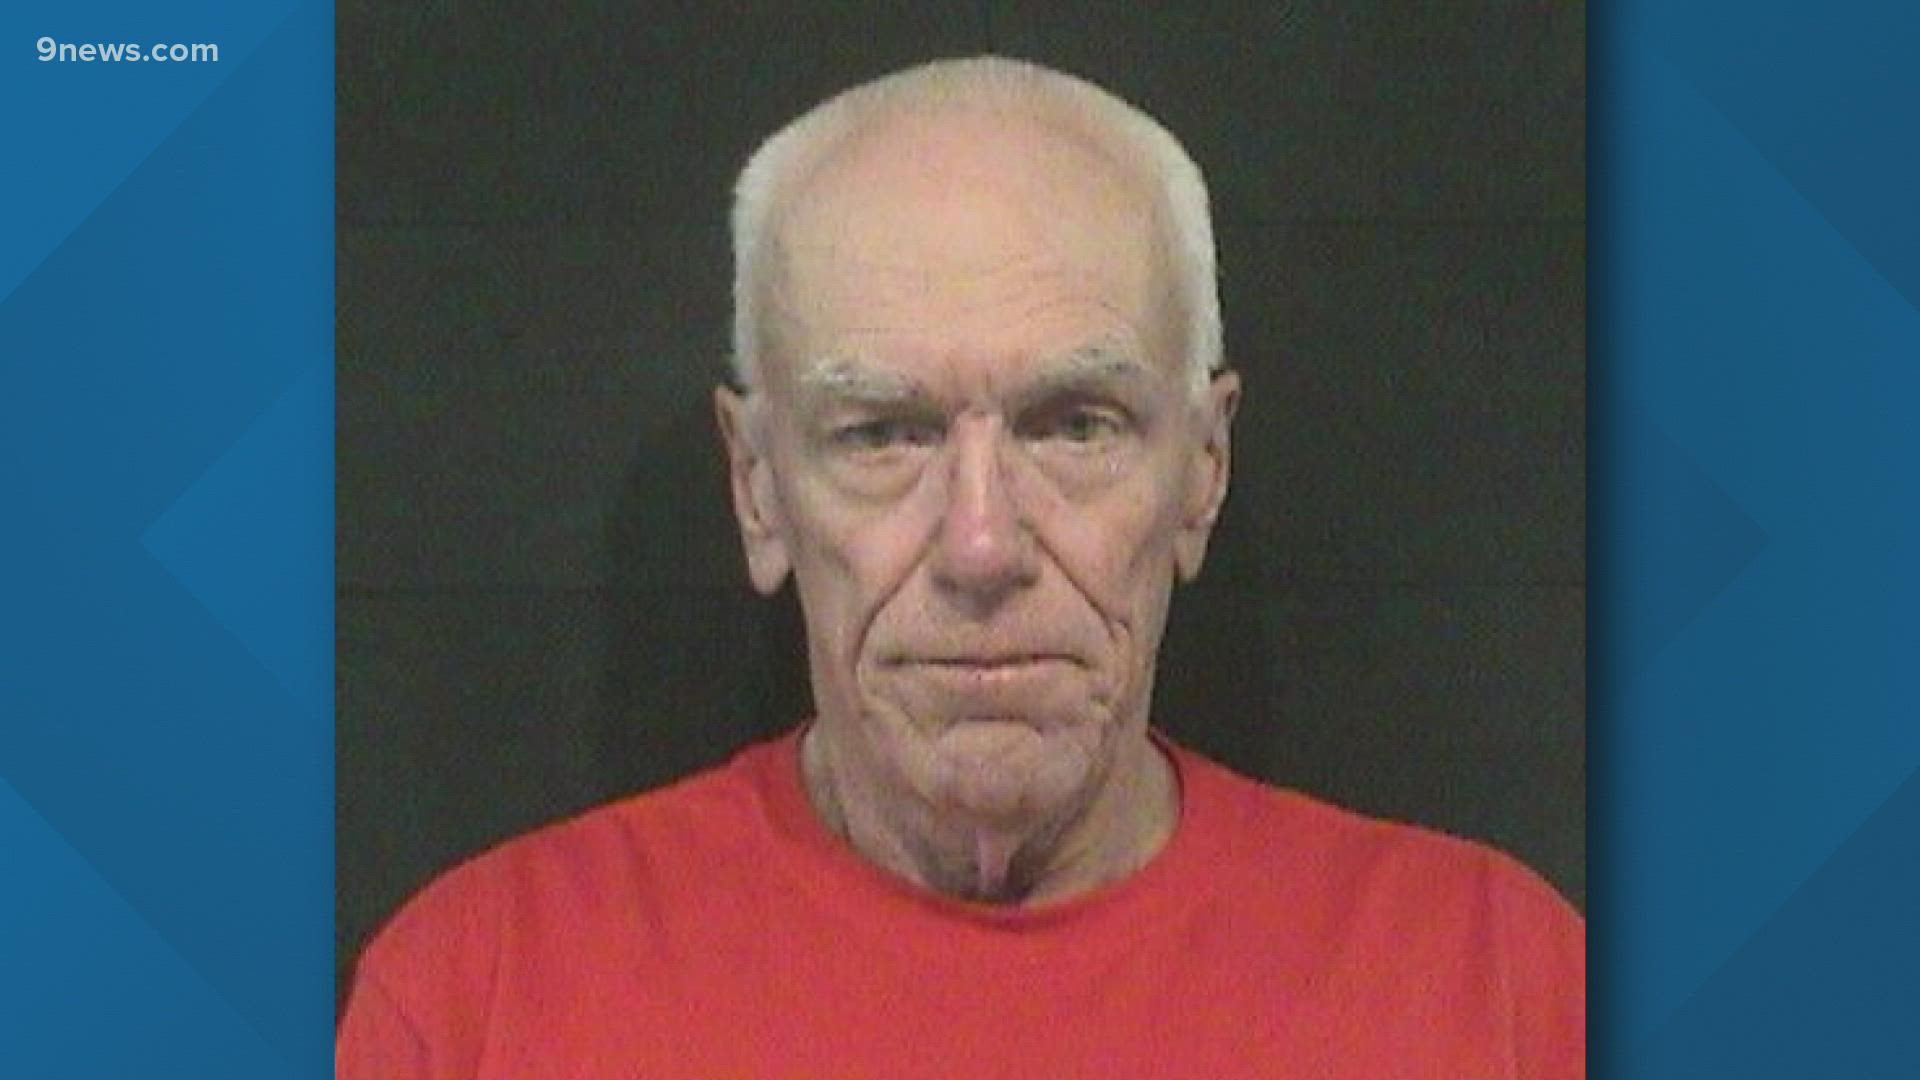 Avery MacCracken, 68, was arrested in San Miguel County on Saturday.